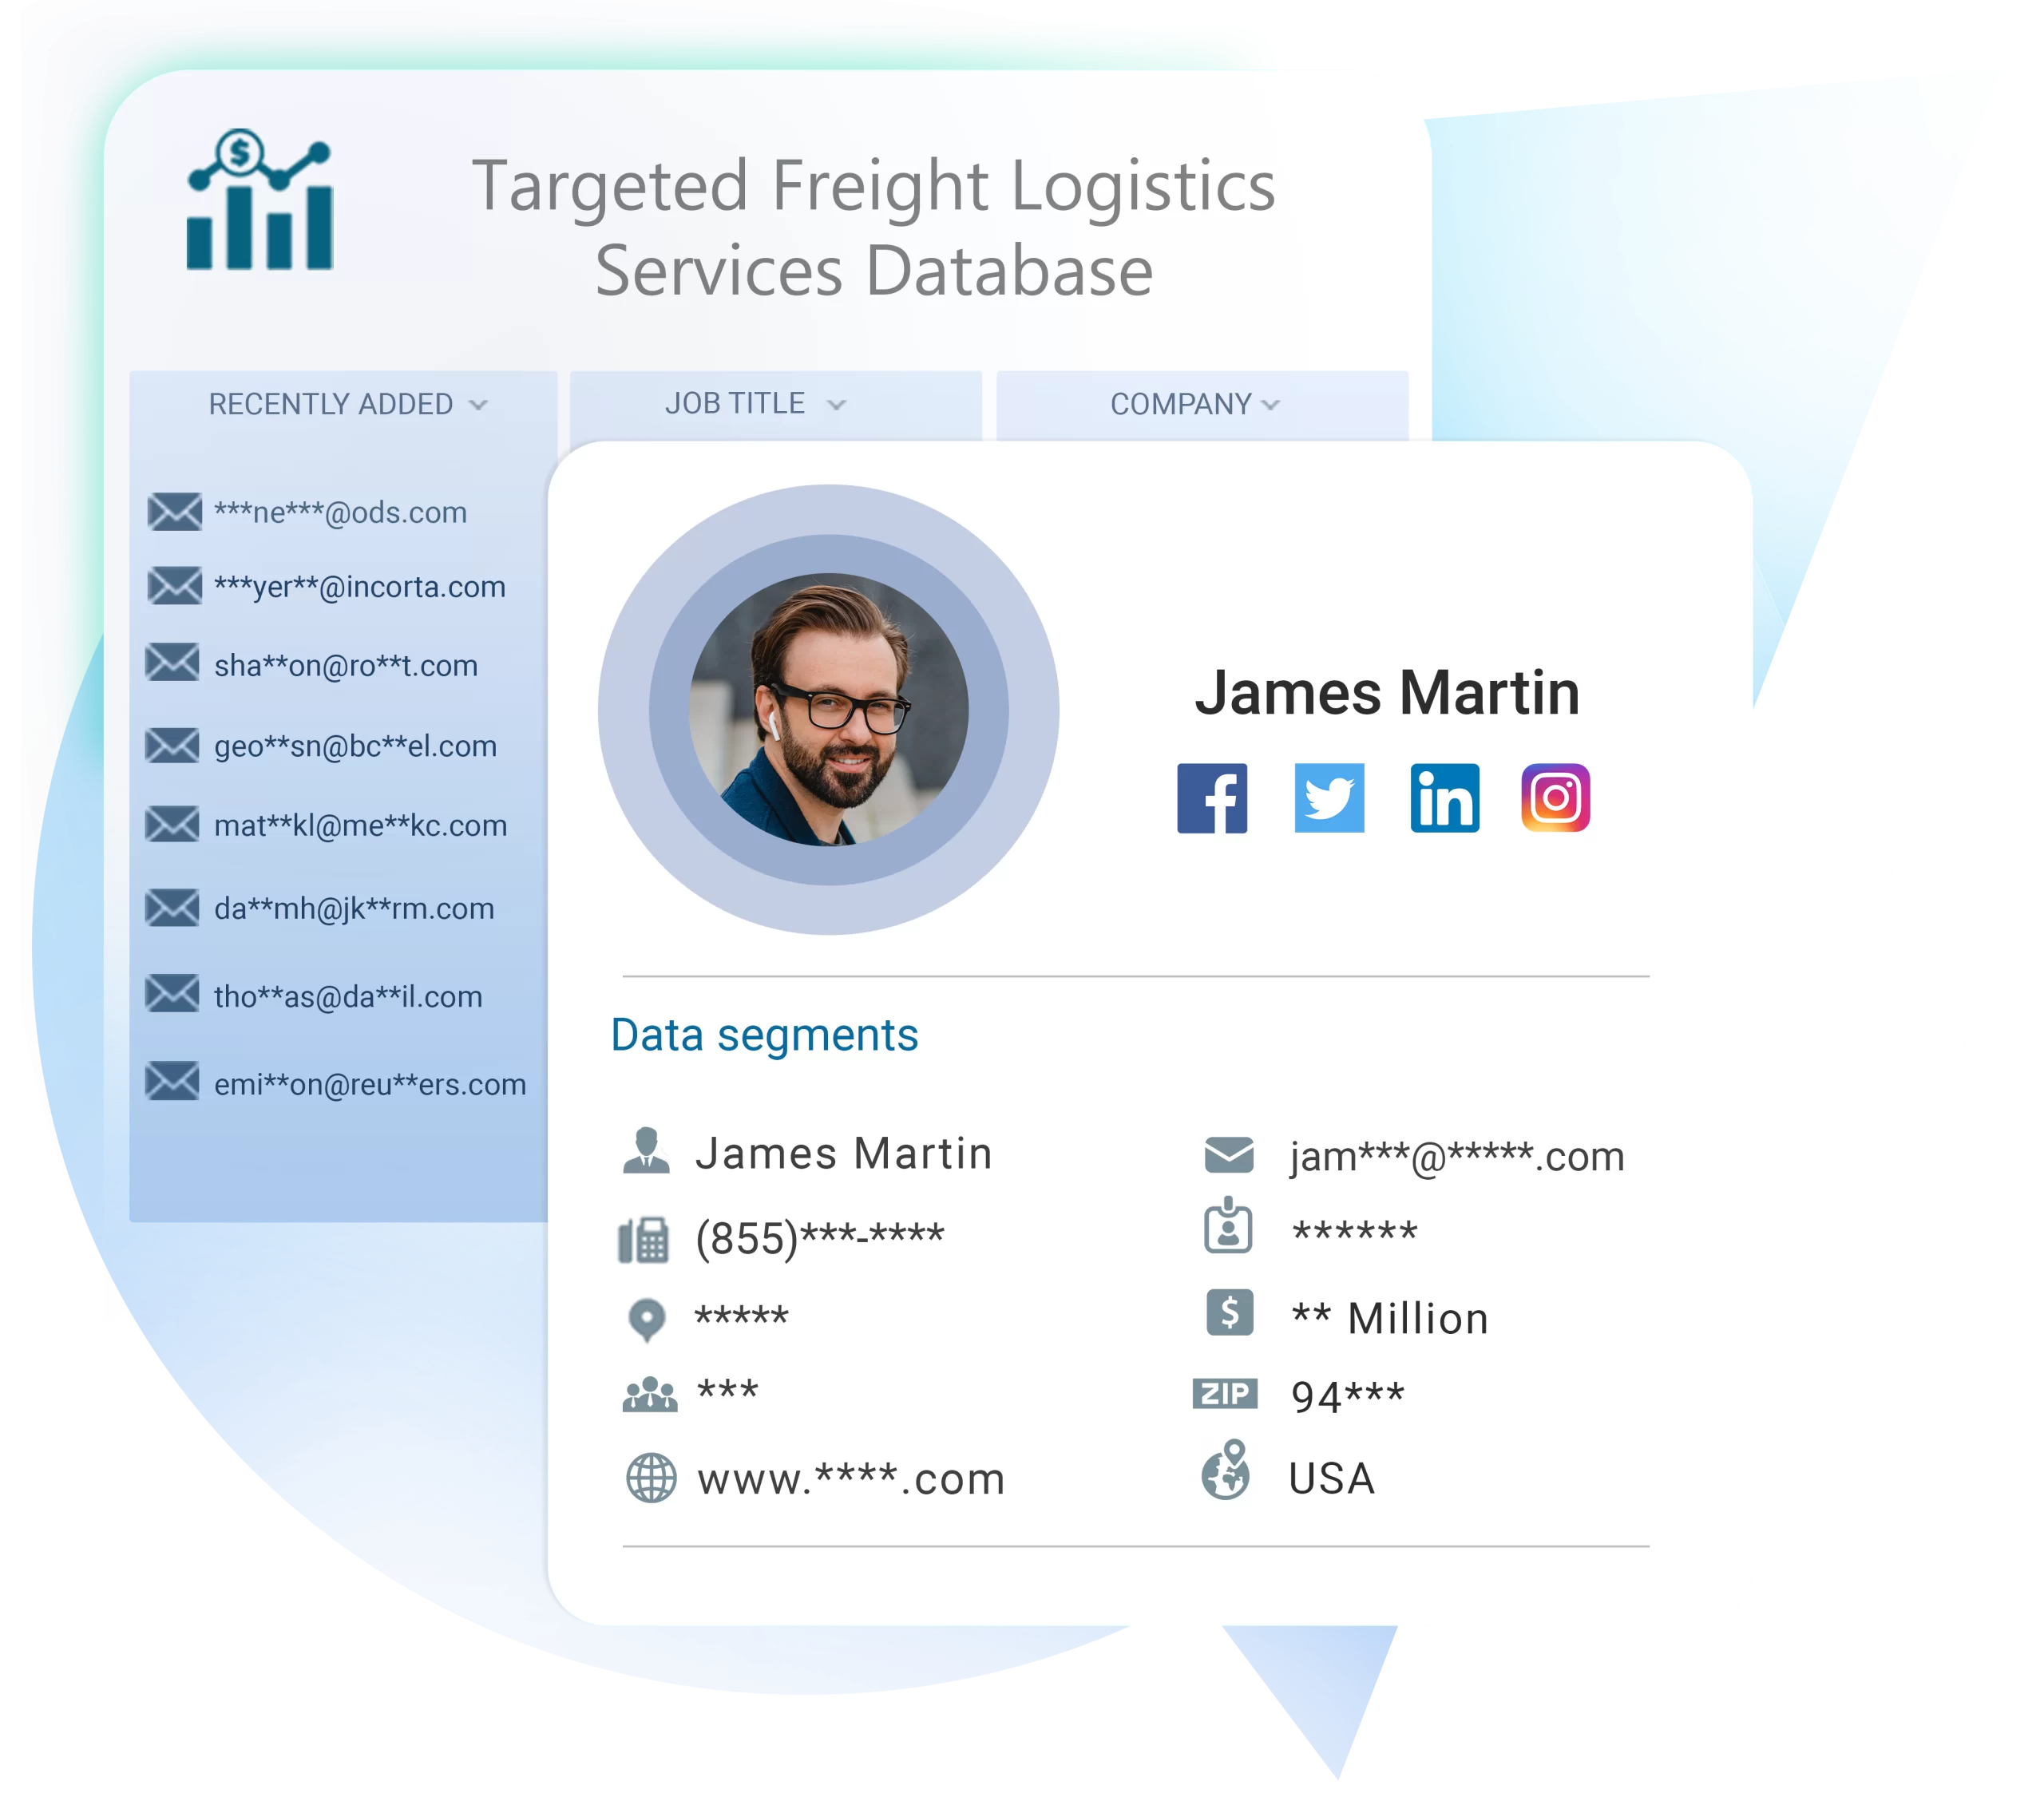 Freight Logistics Services Database